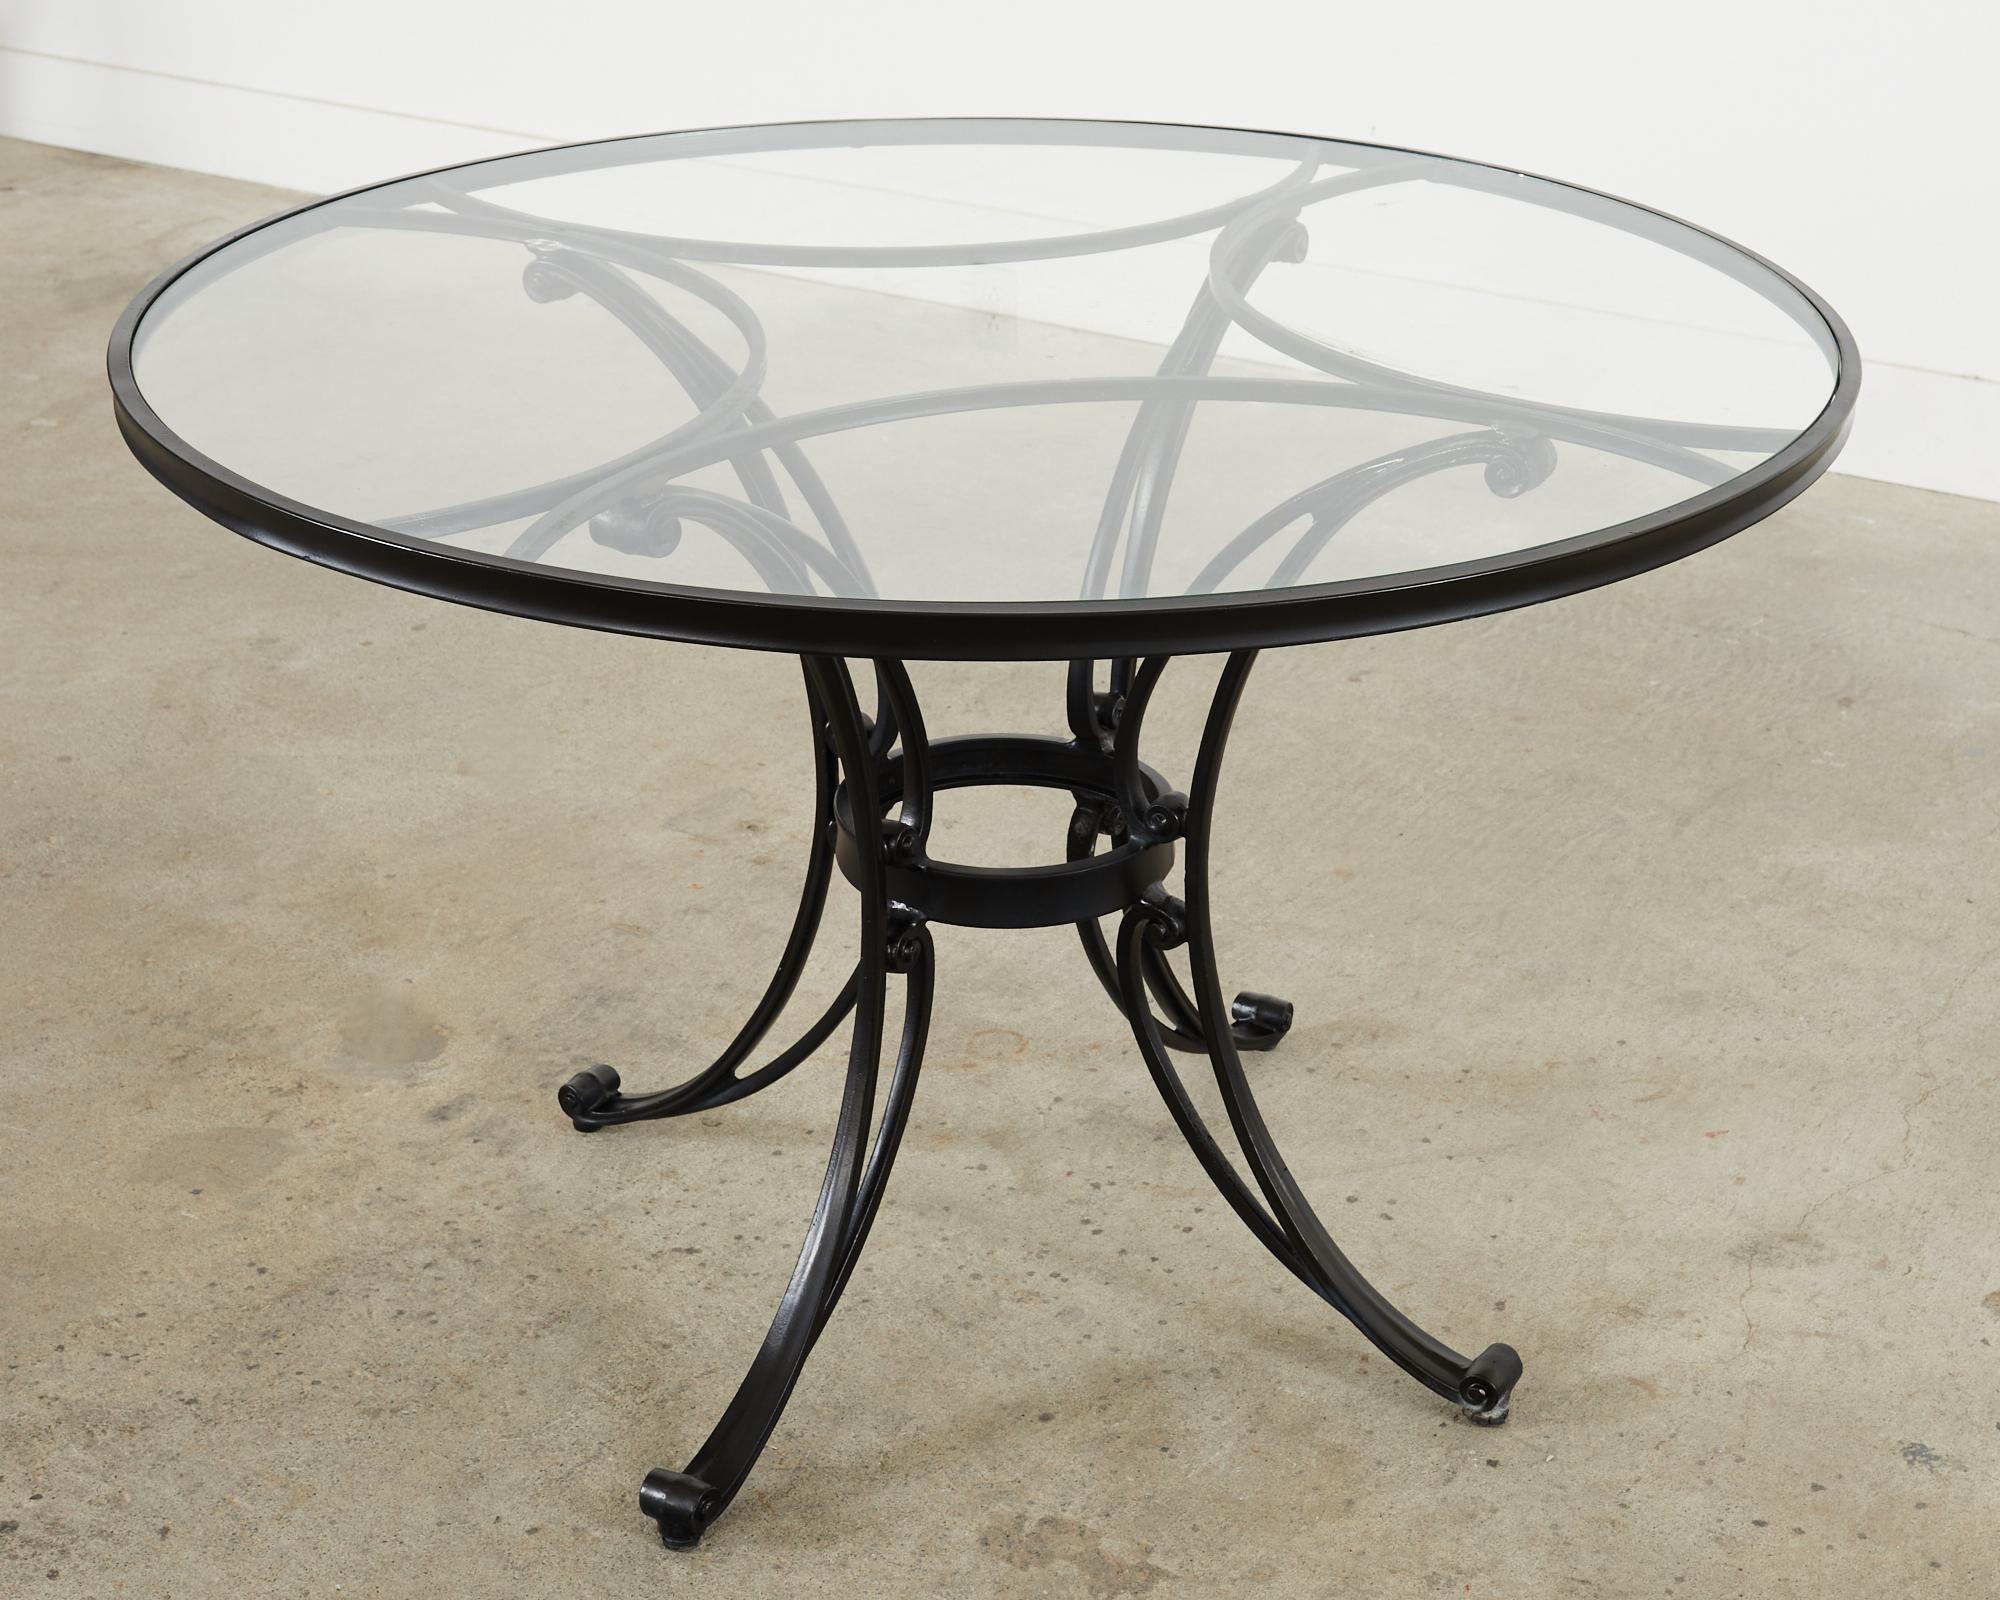 Painted Brown Jordan Aluminum Garden Dining Table and Four Chairs For Sale